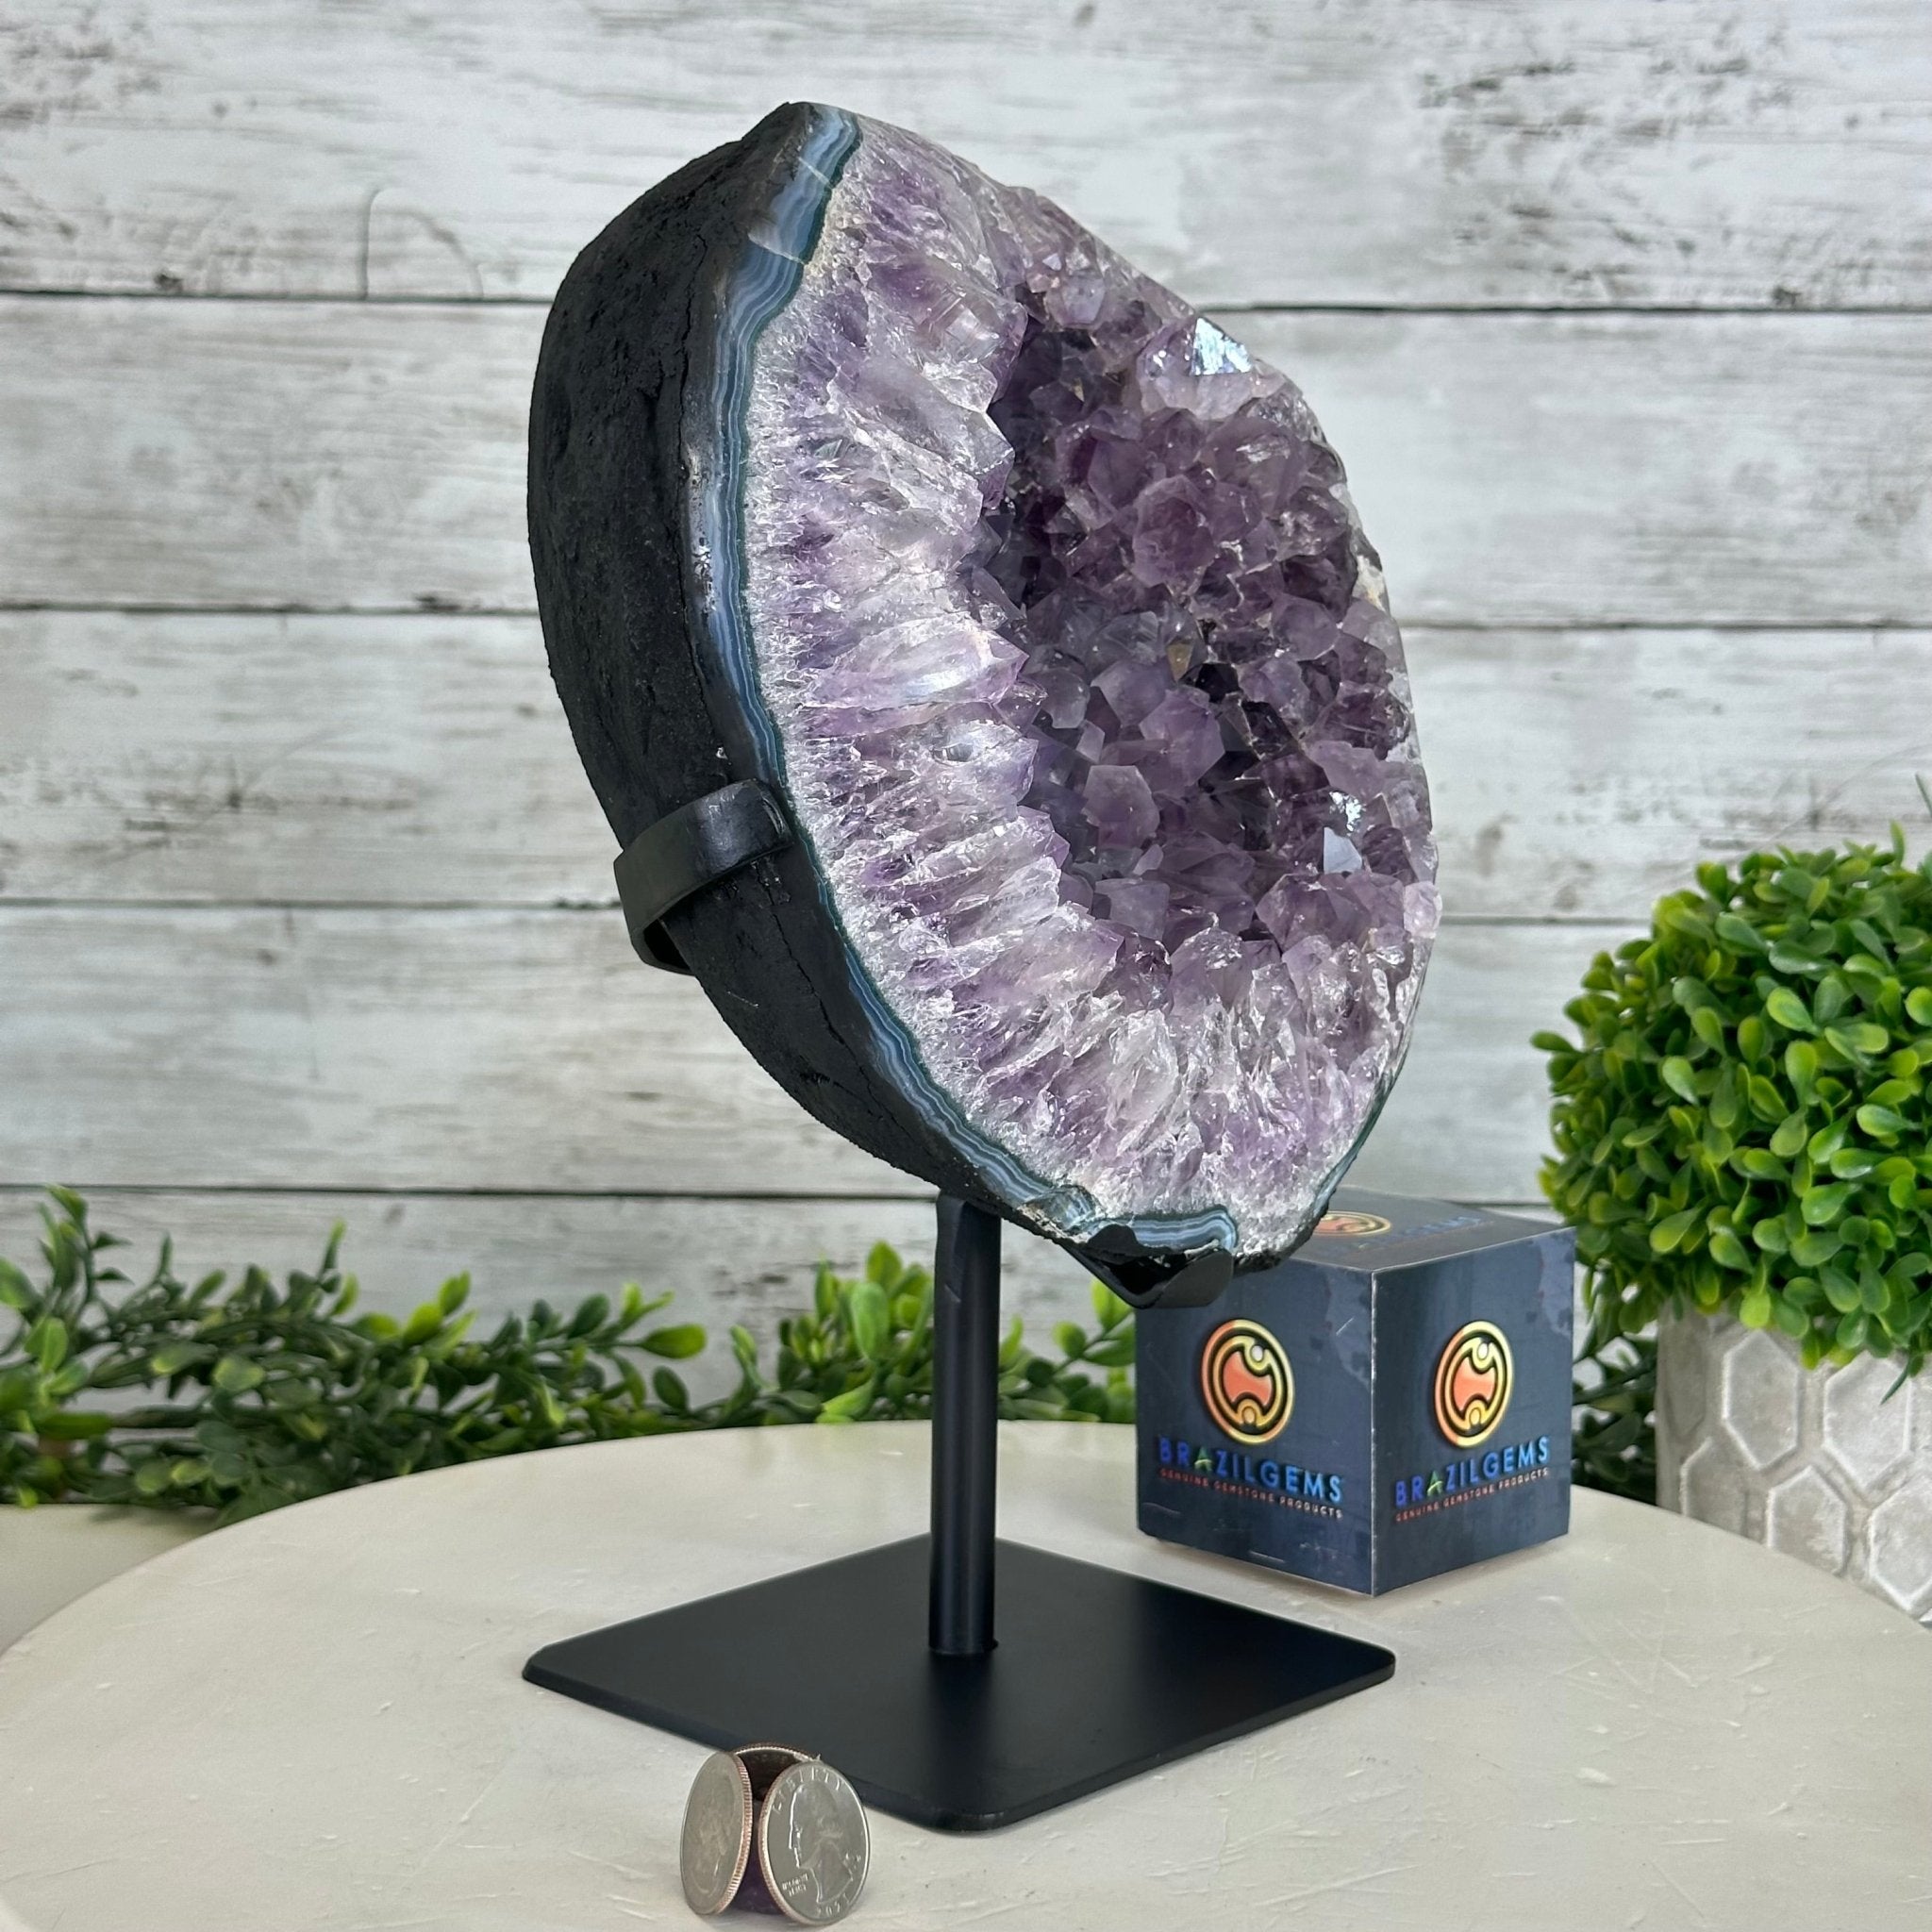 Quality Amethyst Cluster on a Metal Base, 13.3 lbs & 11" Tall #5491 - 0048 - Brazil GemsBrazil GemsQuality Amethyst Cluster on a Metal Base, 13.3 lbs & 11" Tall #5491 - 0048Clusters on Fixed Bases5491 - 0048